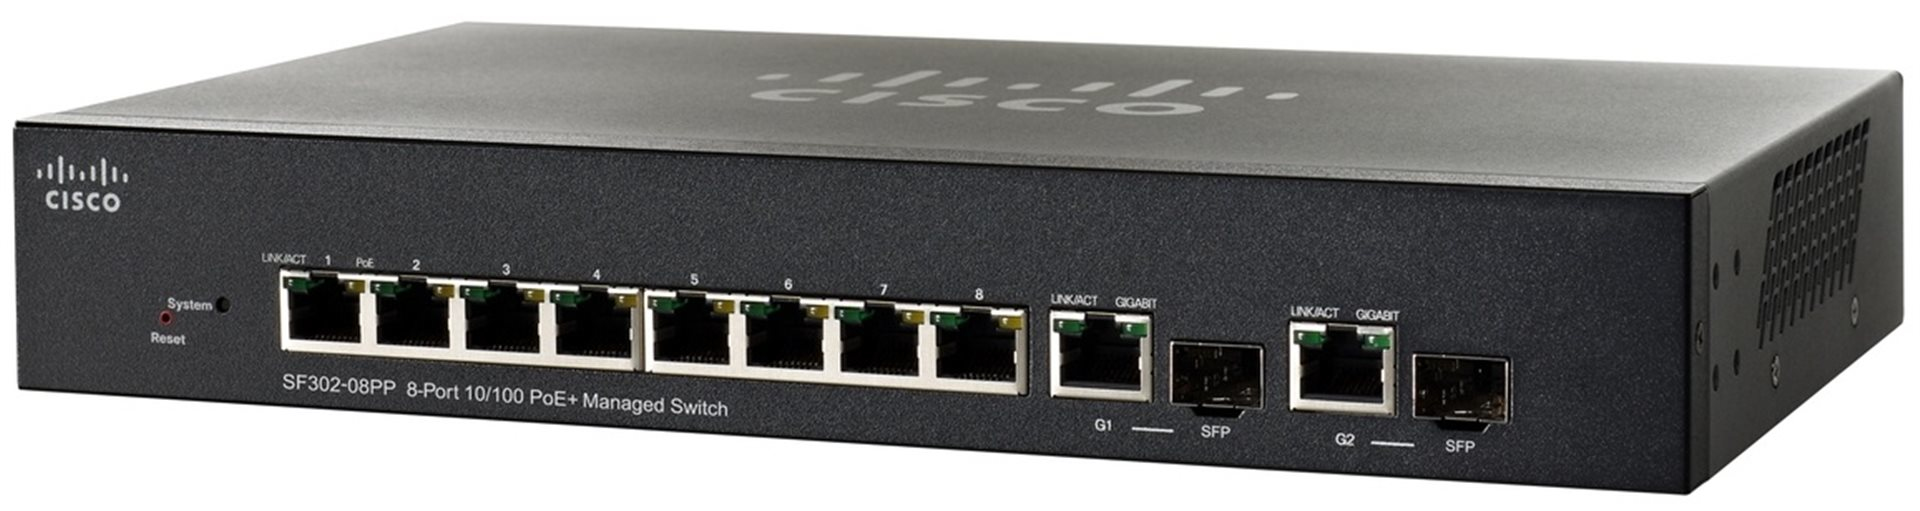 Switch Cisco Sf302-08Pp-K9-Na Fast Ethernet Poe+ 8Puertos 5.6Gbit/S